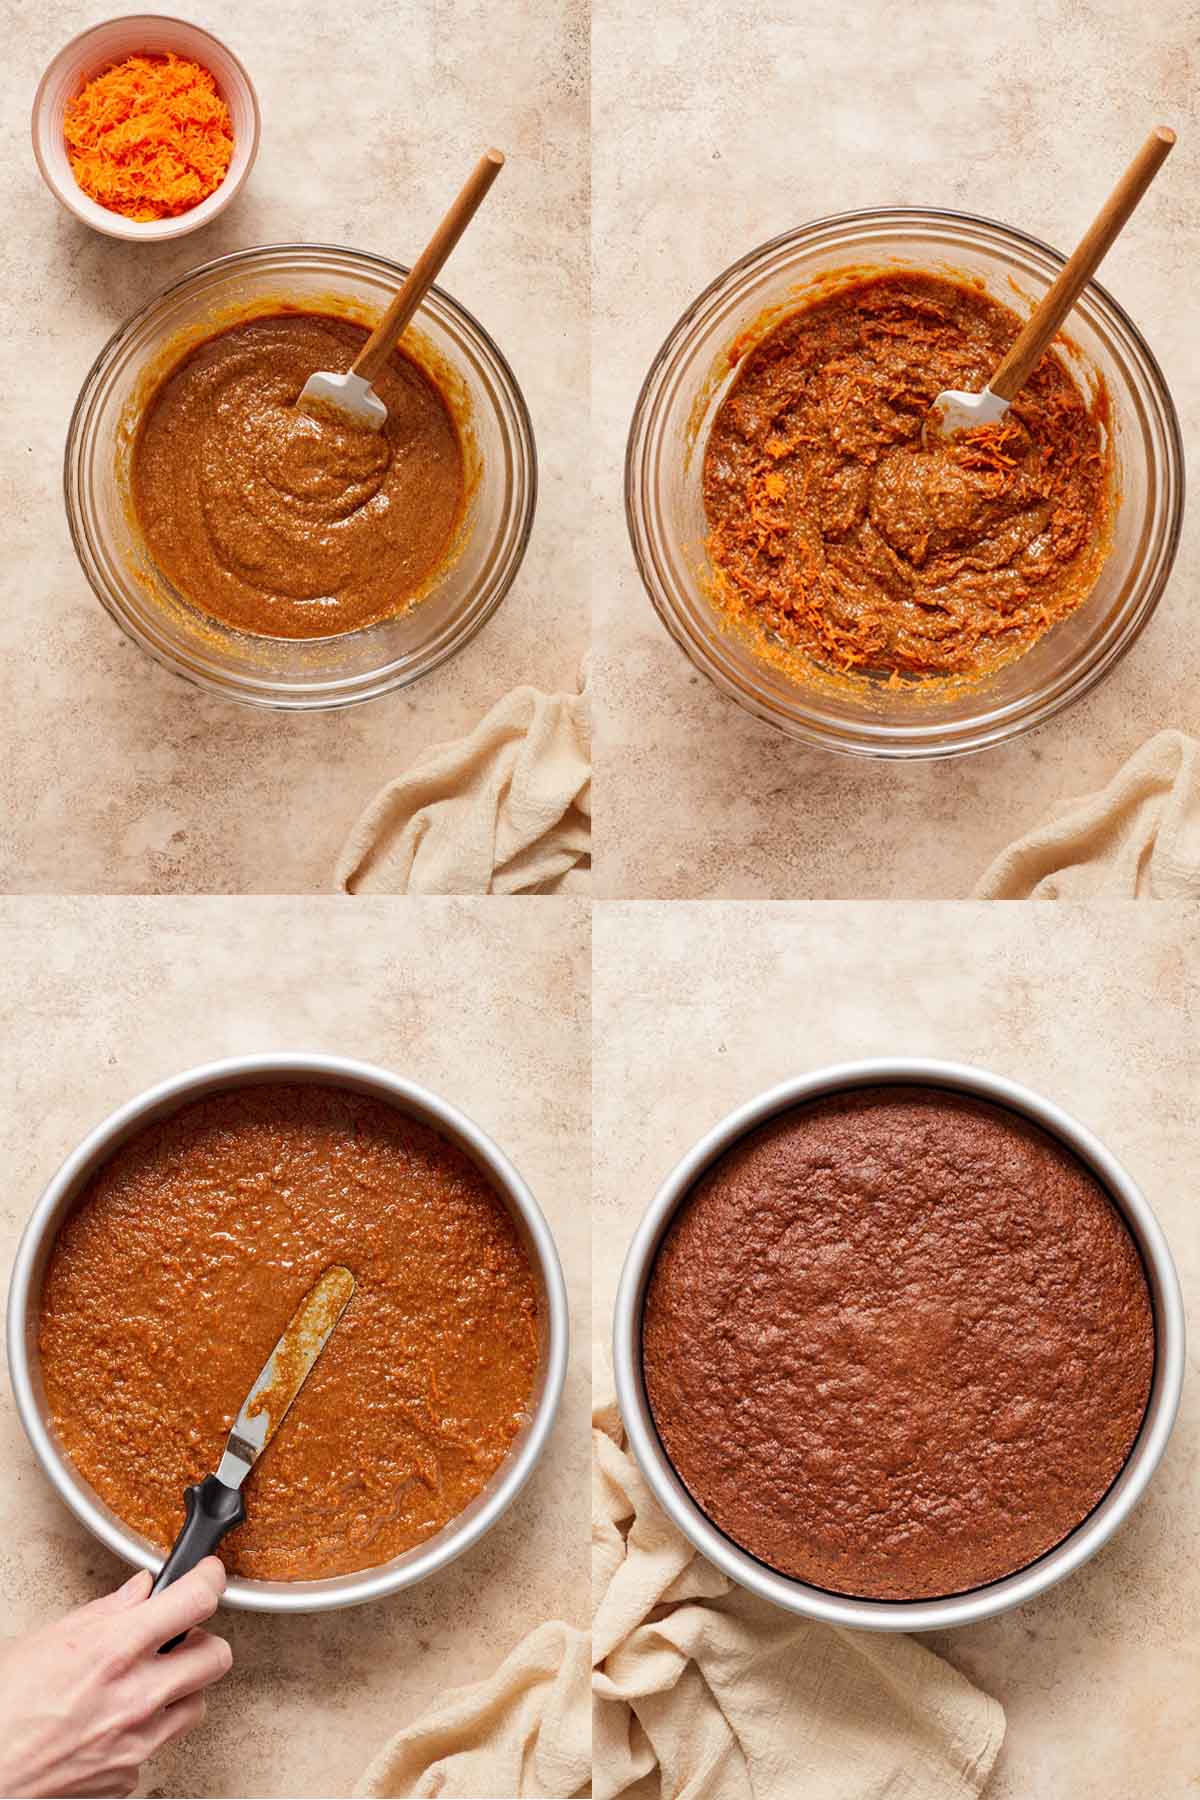 Collage of 4 images showing the process of making the carrot cake batter.